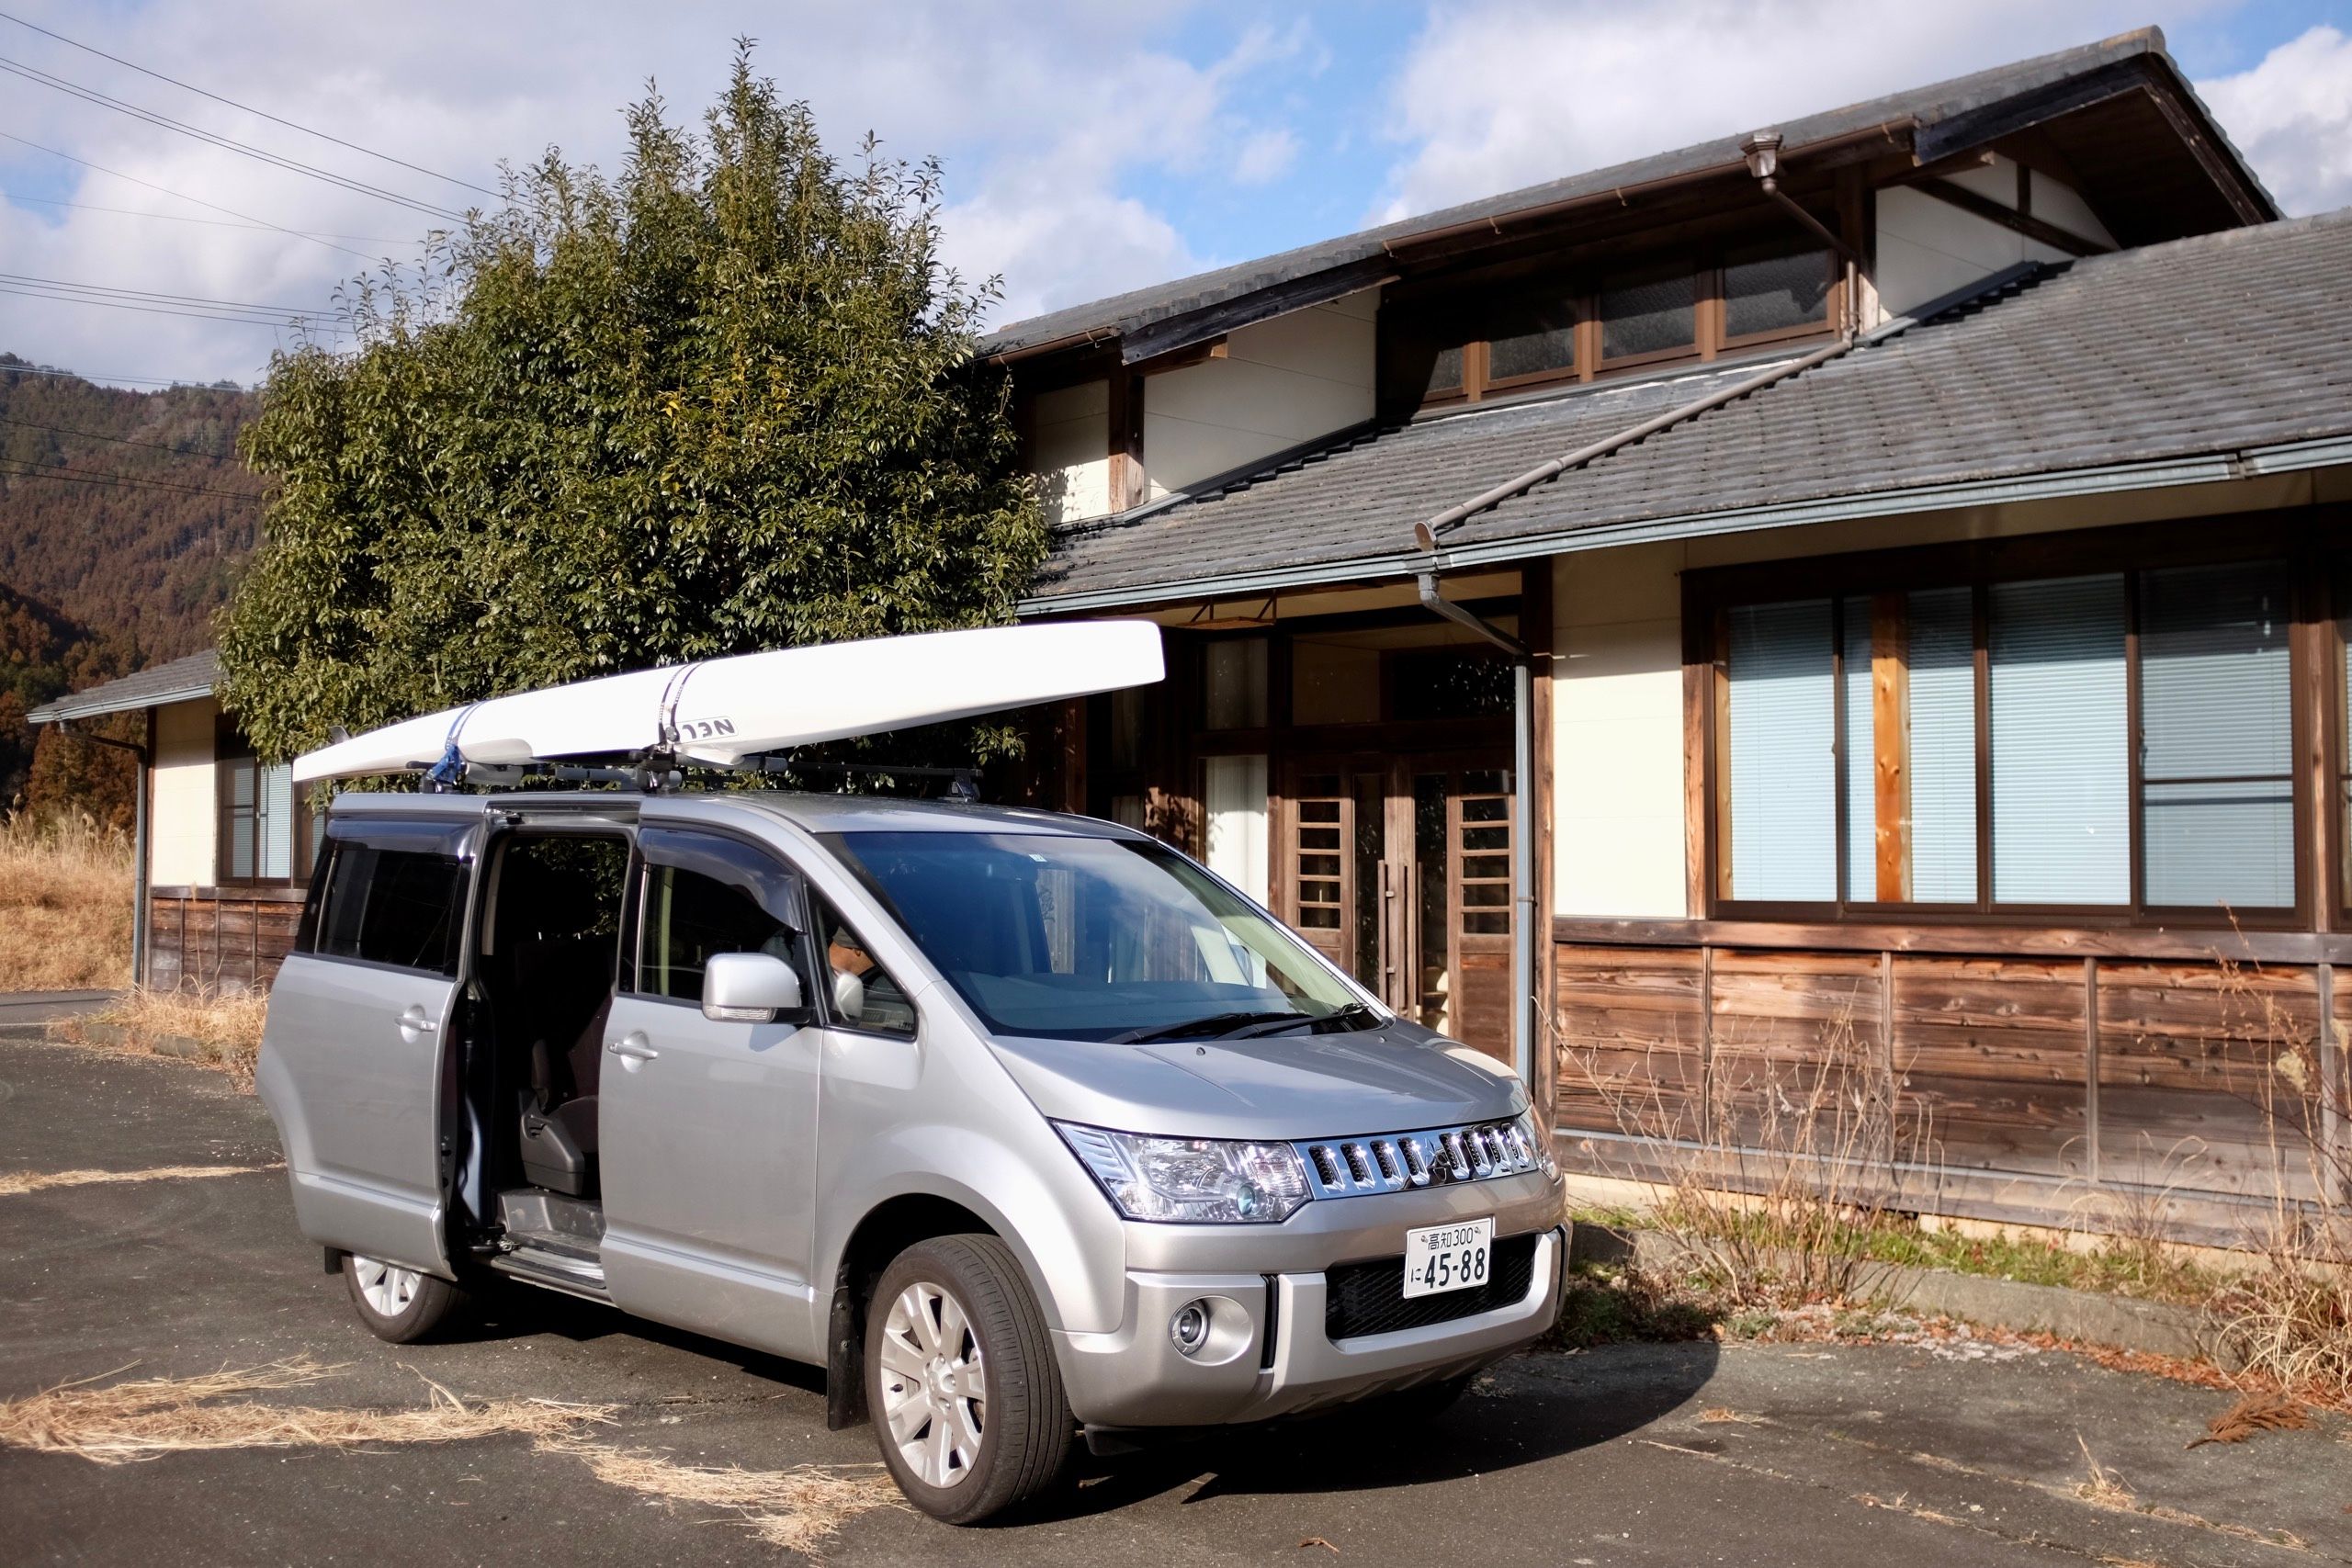 A minivan with a white racing kayak lashed to its roof parked in front of a wooden Japanese house.